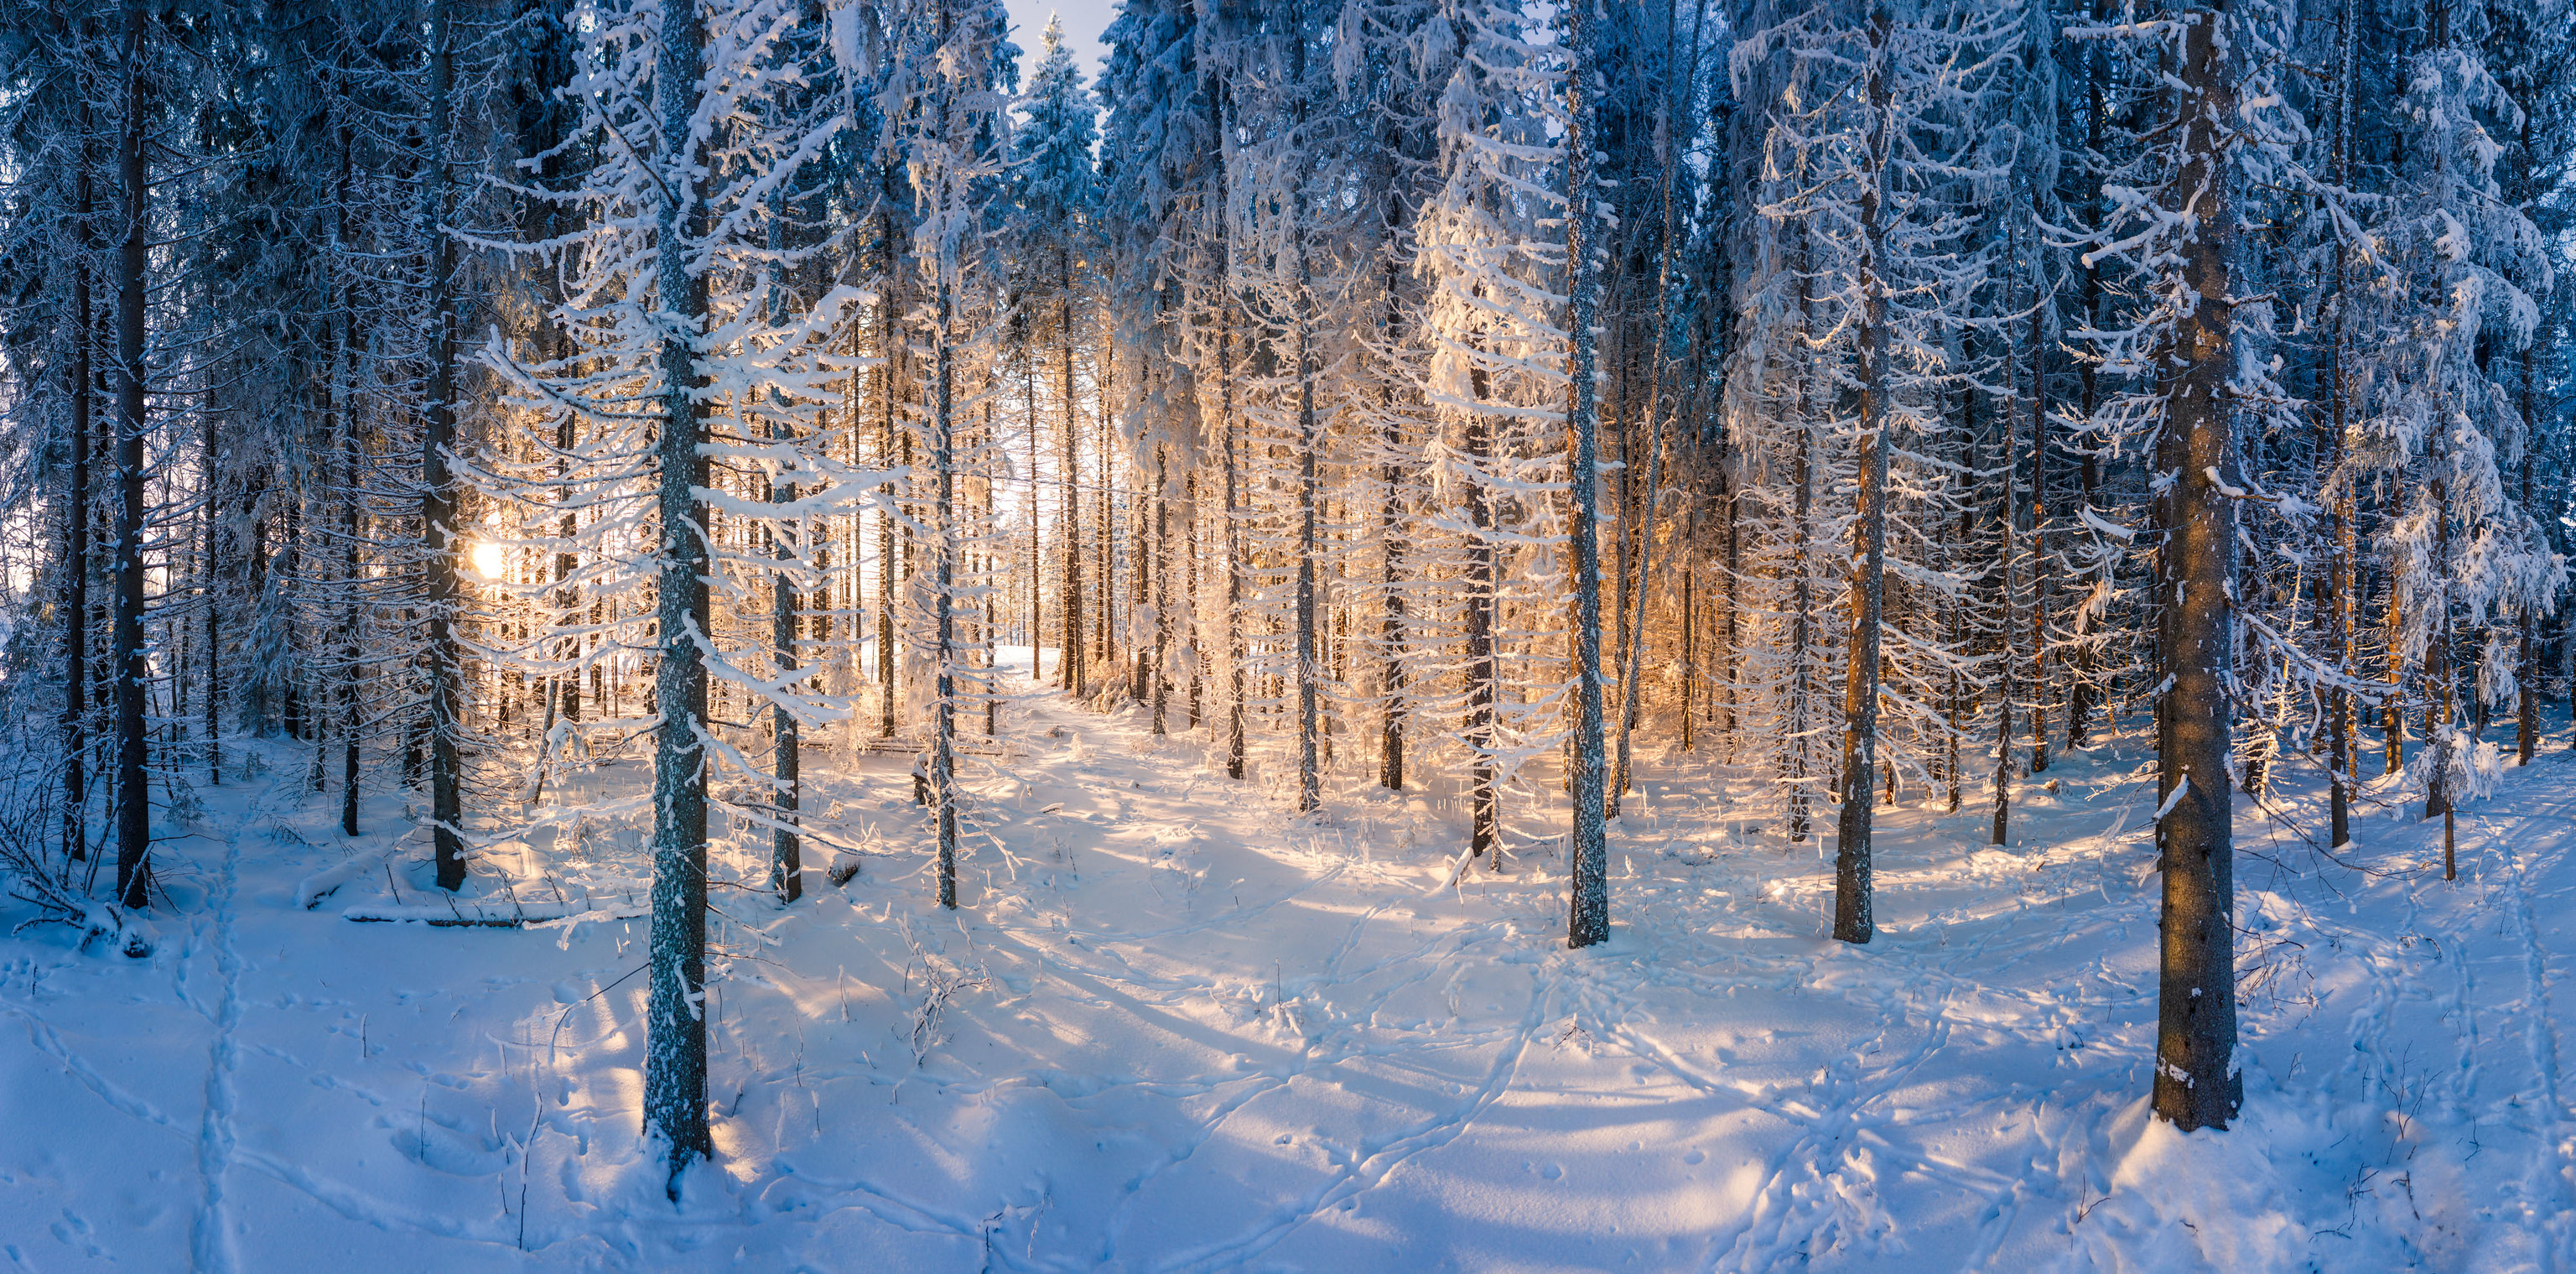 General 3072x1519 nature snow forest trees winter Finland sunrise outdoors cold ice plants sunlight